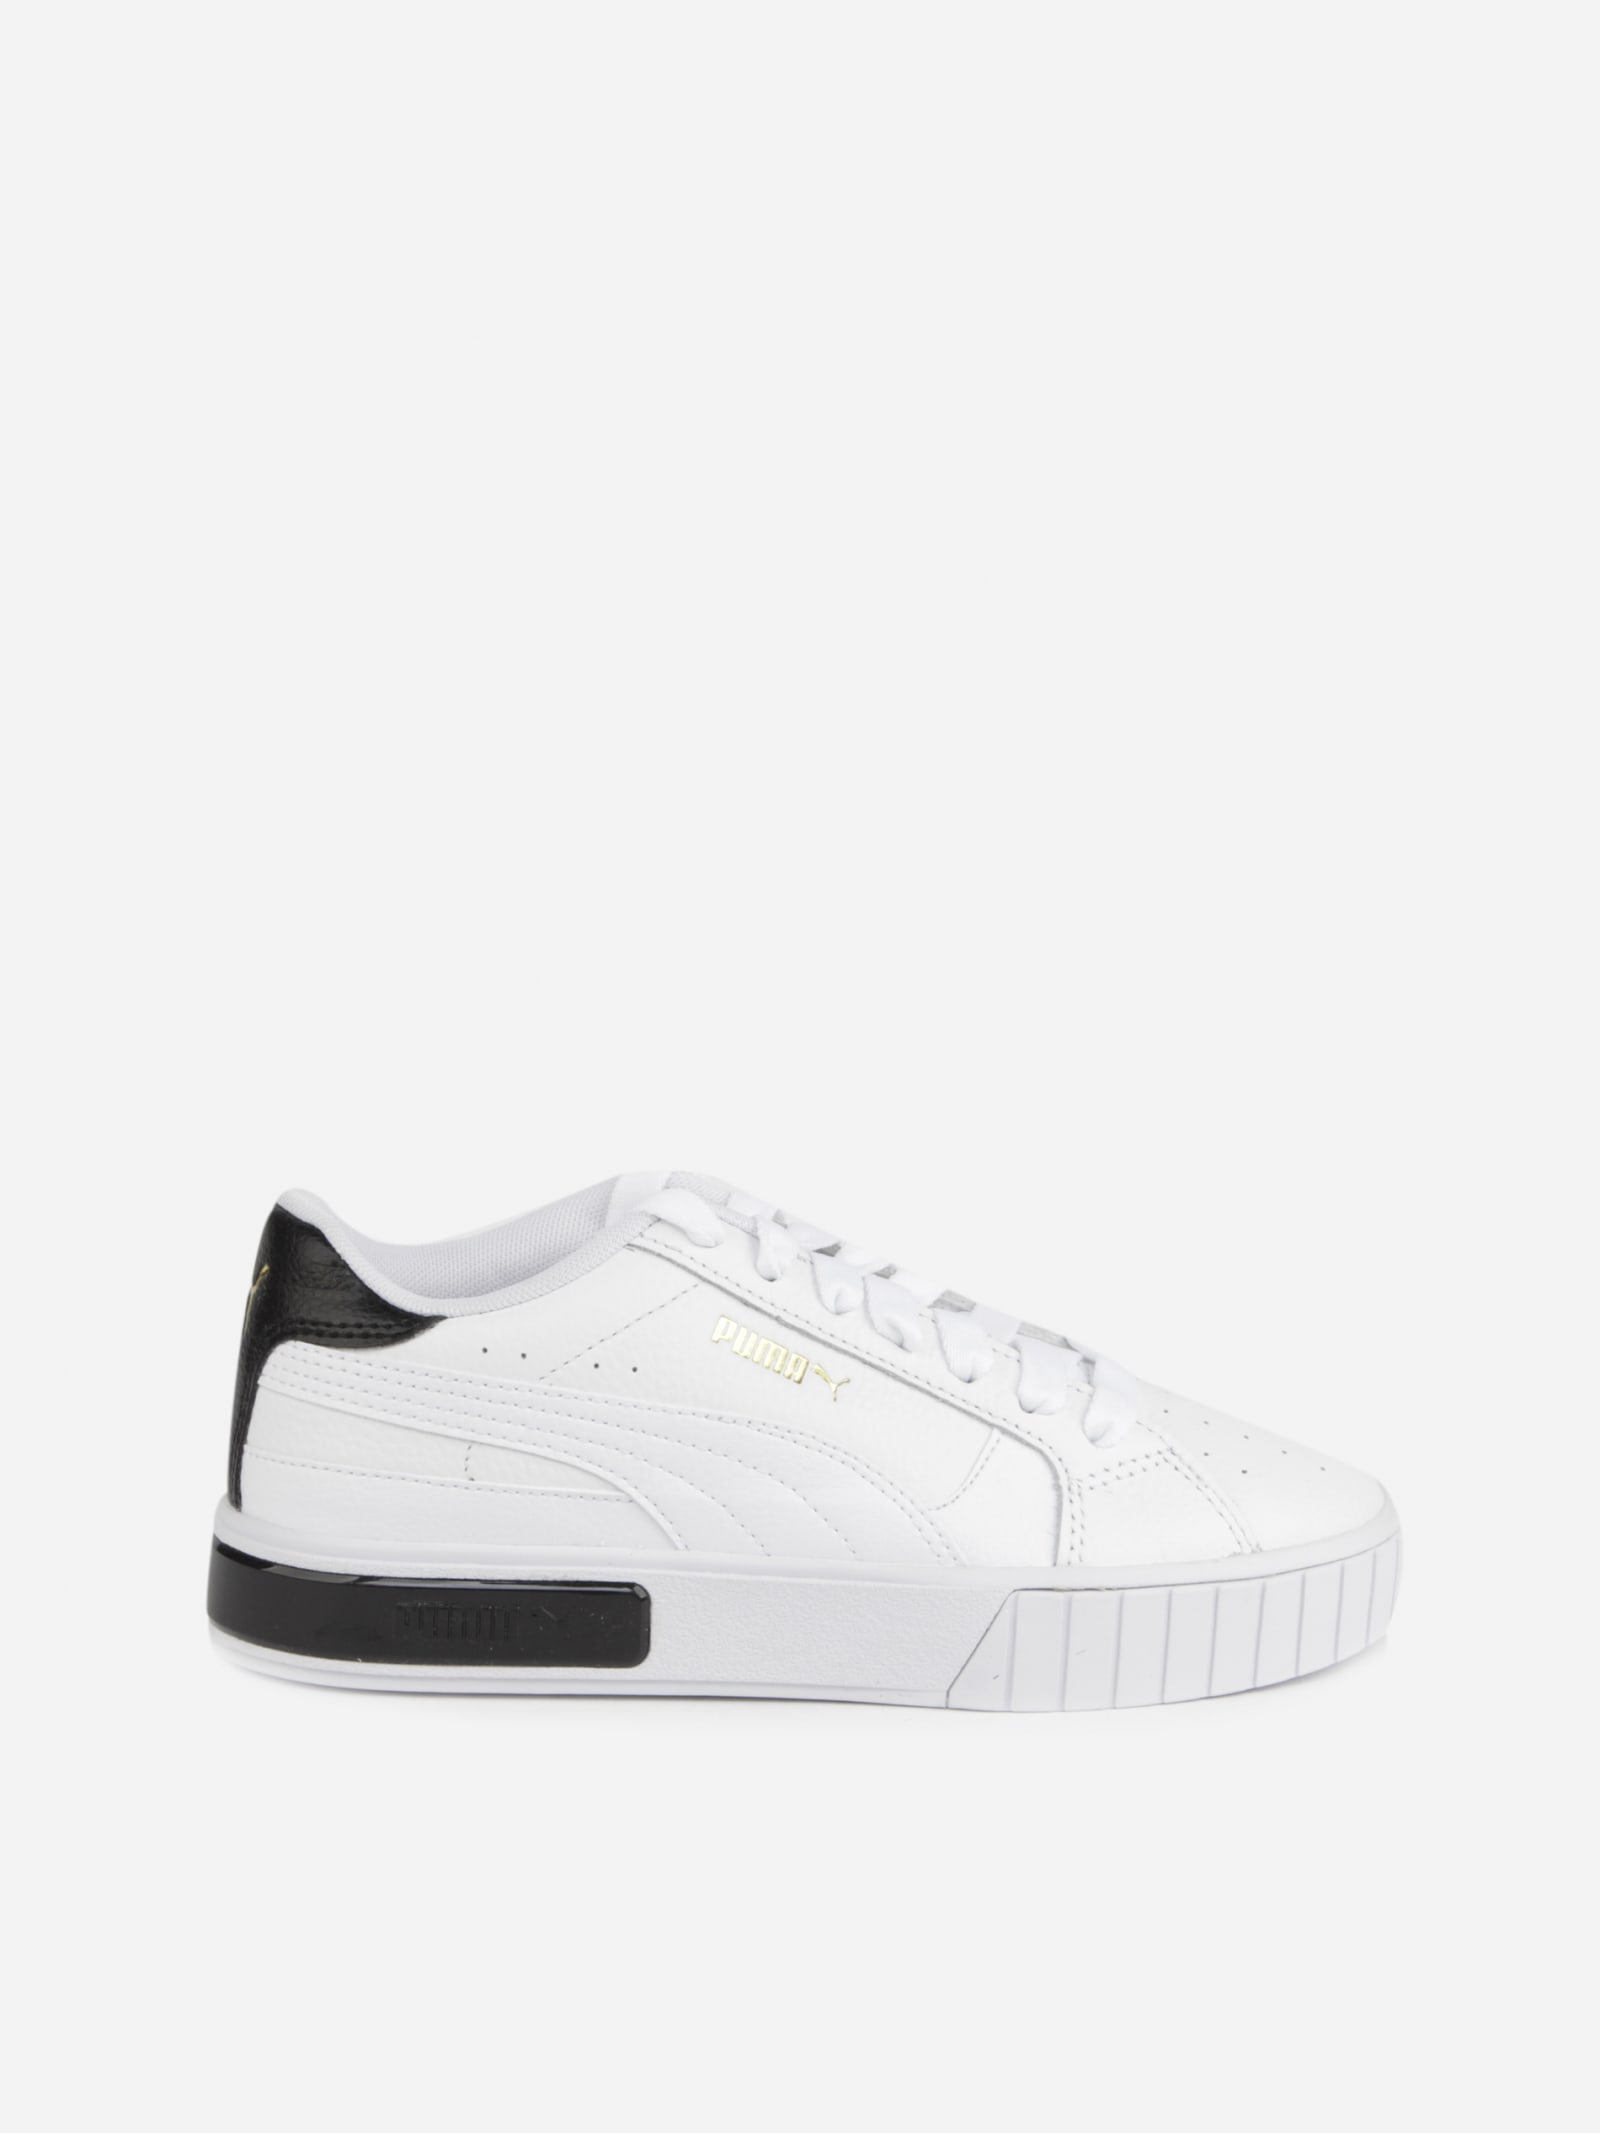 Puma Select Cali Star Sneakers In Leather